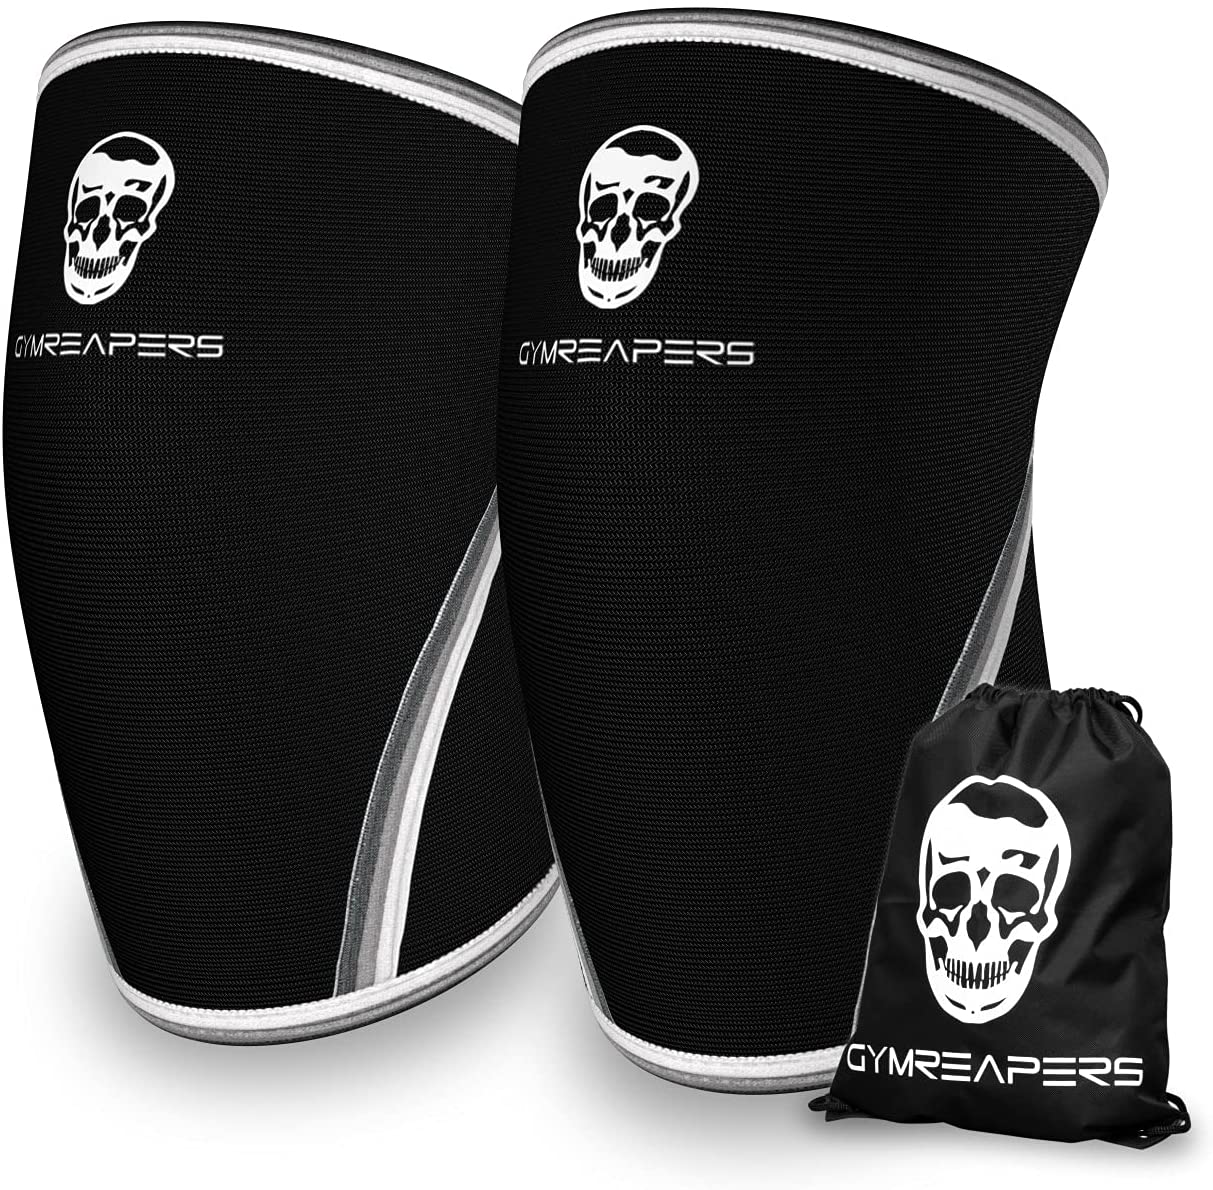 Gym Knee Sleeves Review